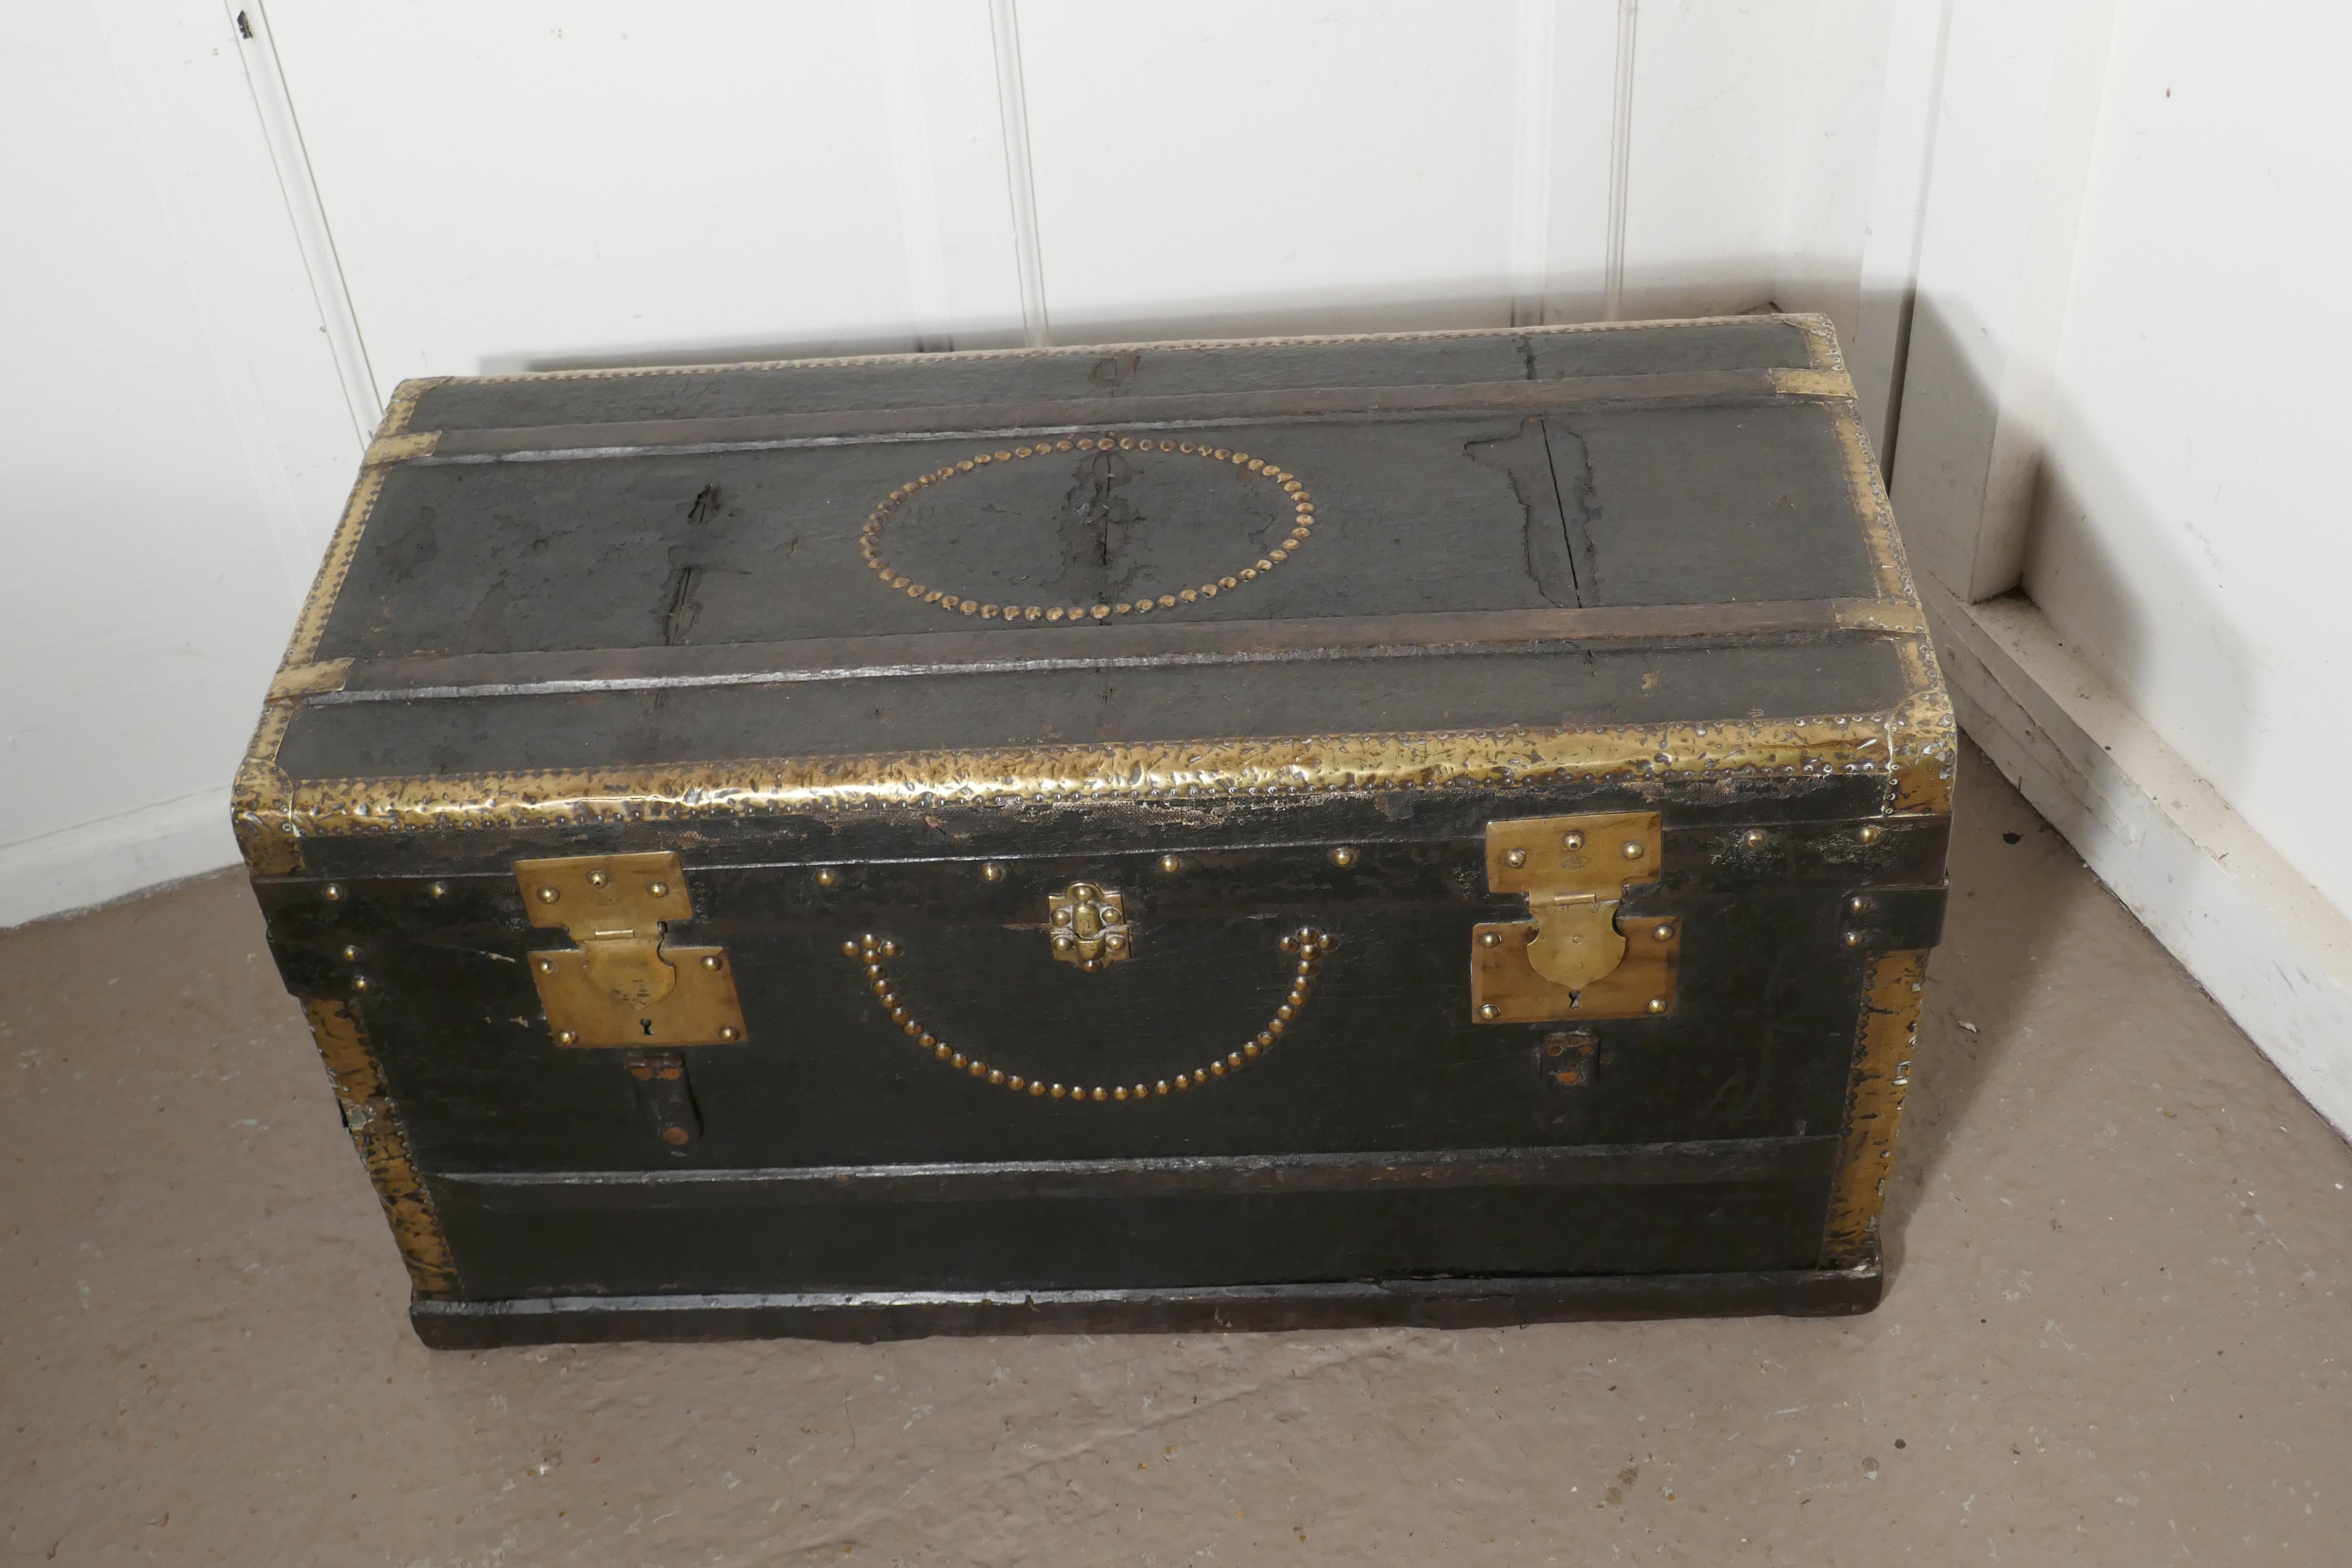 French country house chic leather and brass bound chest,


The trunk is covered in heavy quality hide, it has brass bound edges and a brass studded decoration on the top and front, on the sides there are strong leather carrying handles and on the